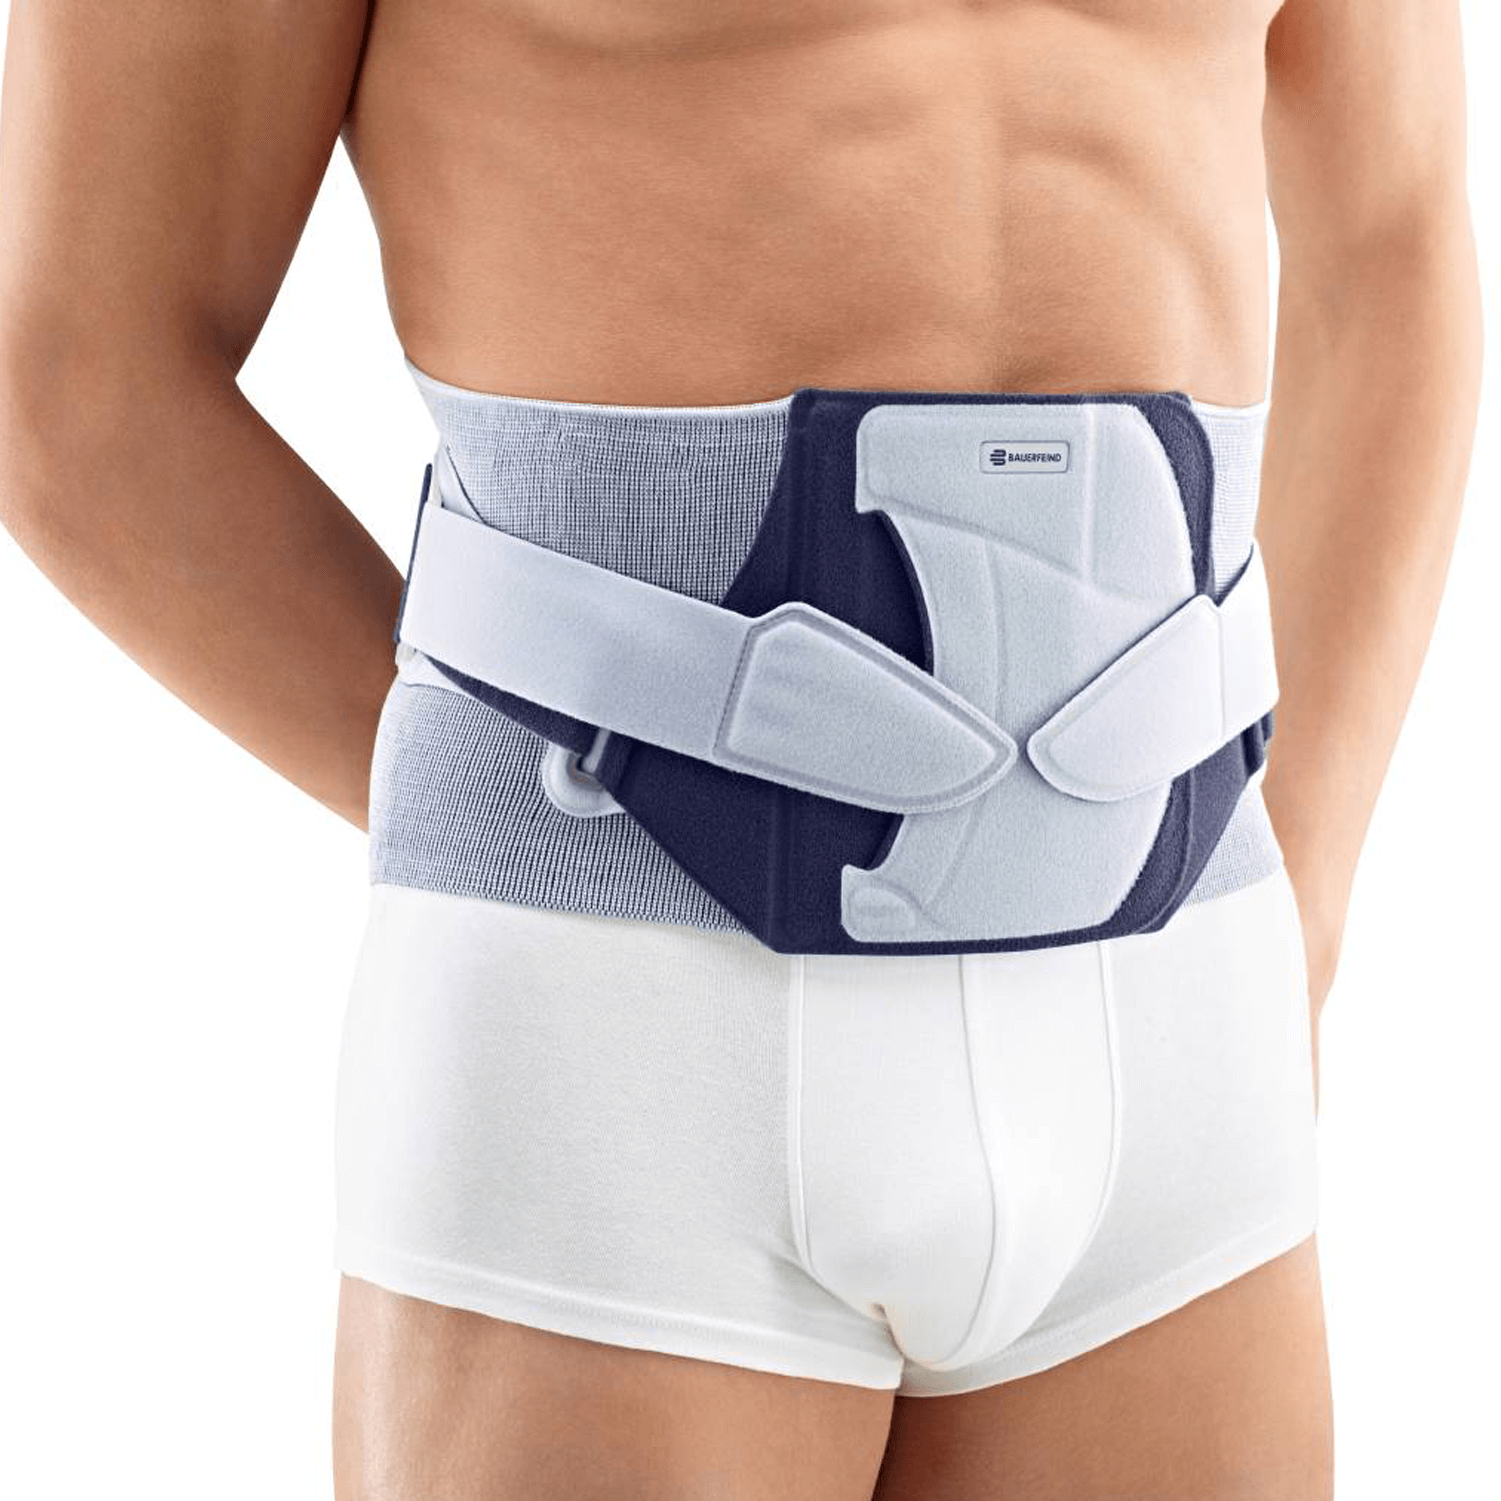 FlexGuard Support Back Brace (Ceinture Lombaire) For Women And Men - Lumbar  Belt For Lower Back - Strong Compression, Pain Relief, Pockets For Heat Or